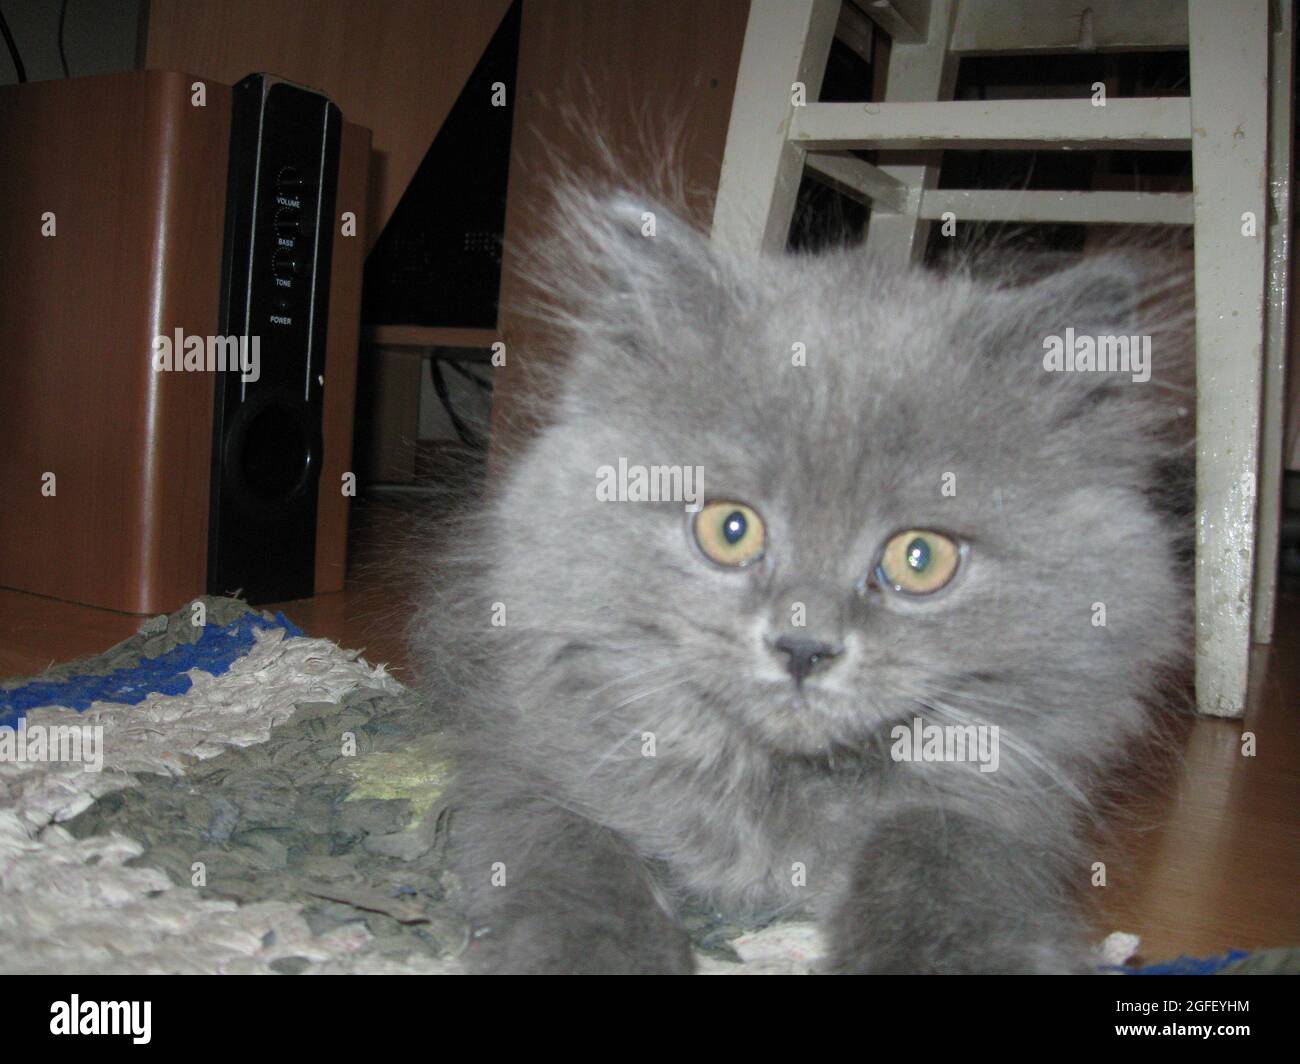 Photograph of a pet cat in a home environment Stock Photo